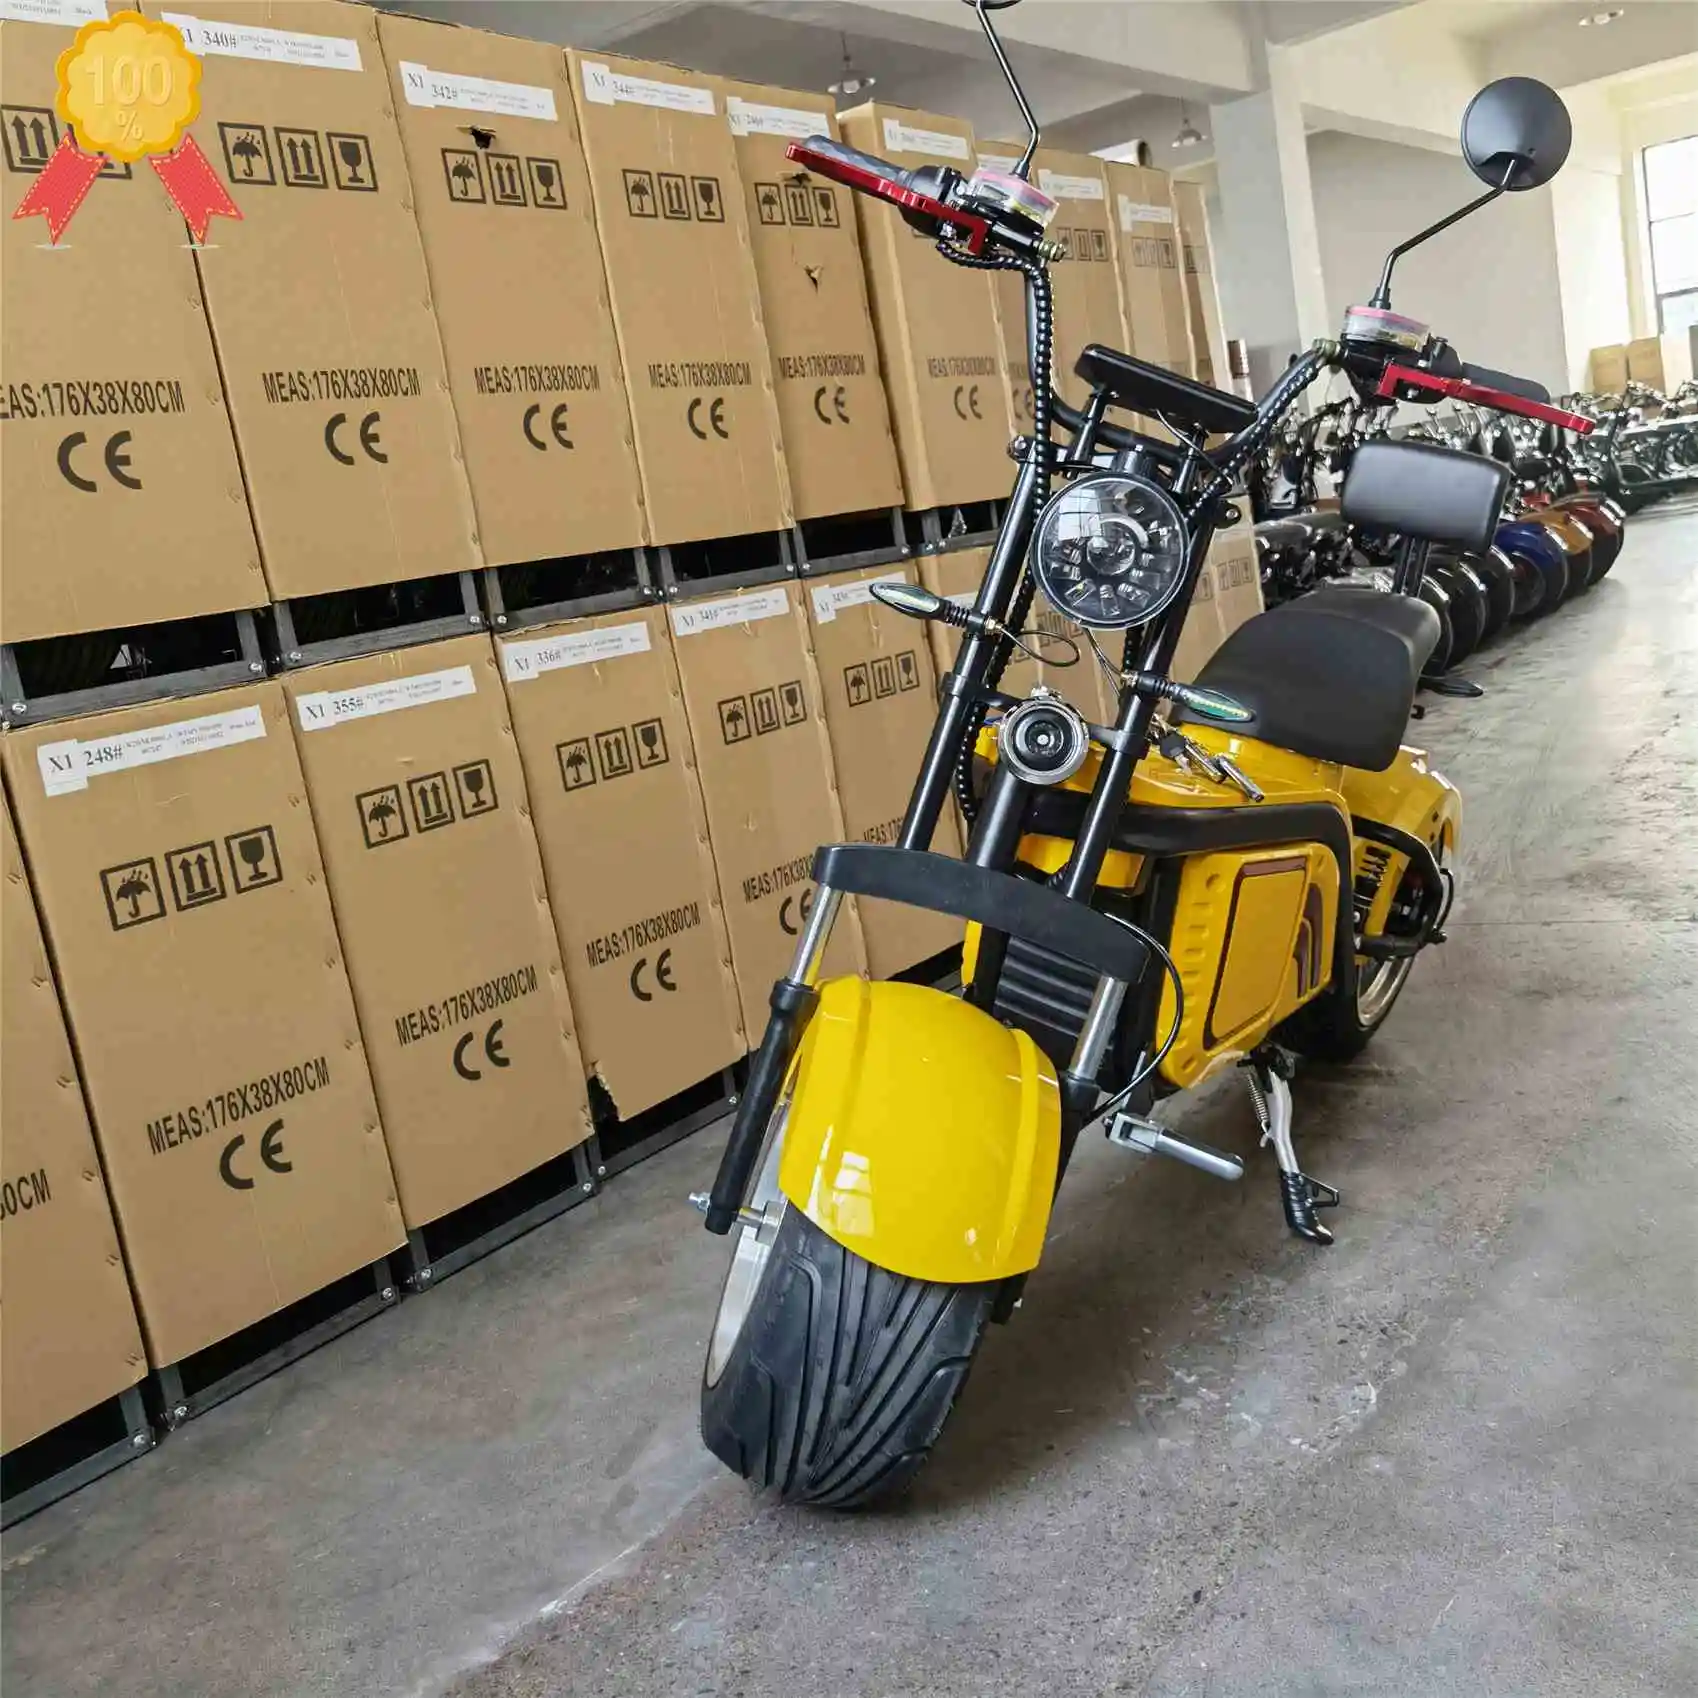 

Hot Selling 2000W 60V Lithium Battery Citycoco Scrooser Seev Cheap City Fat Tire Electric Scooter With Back Mirror